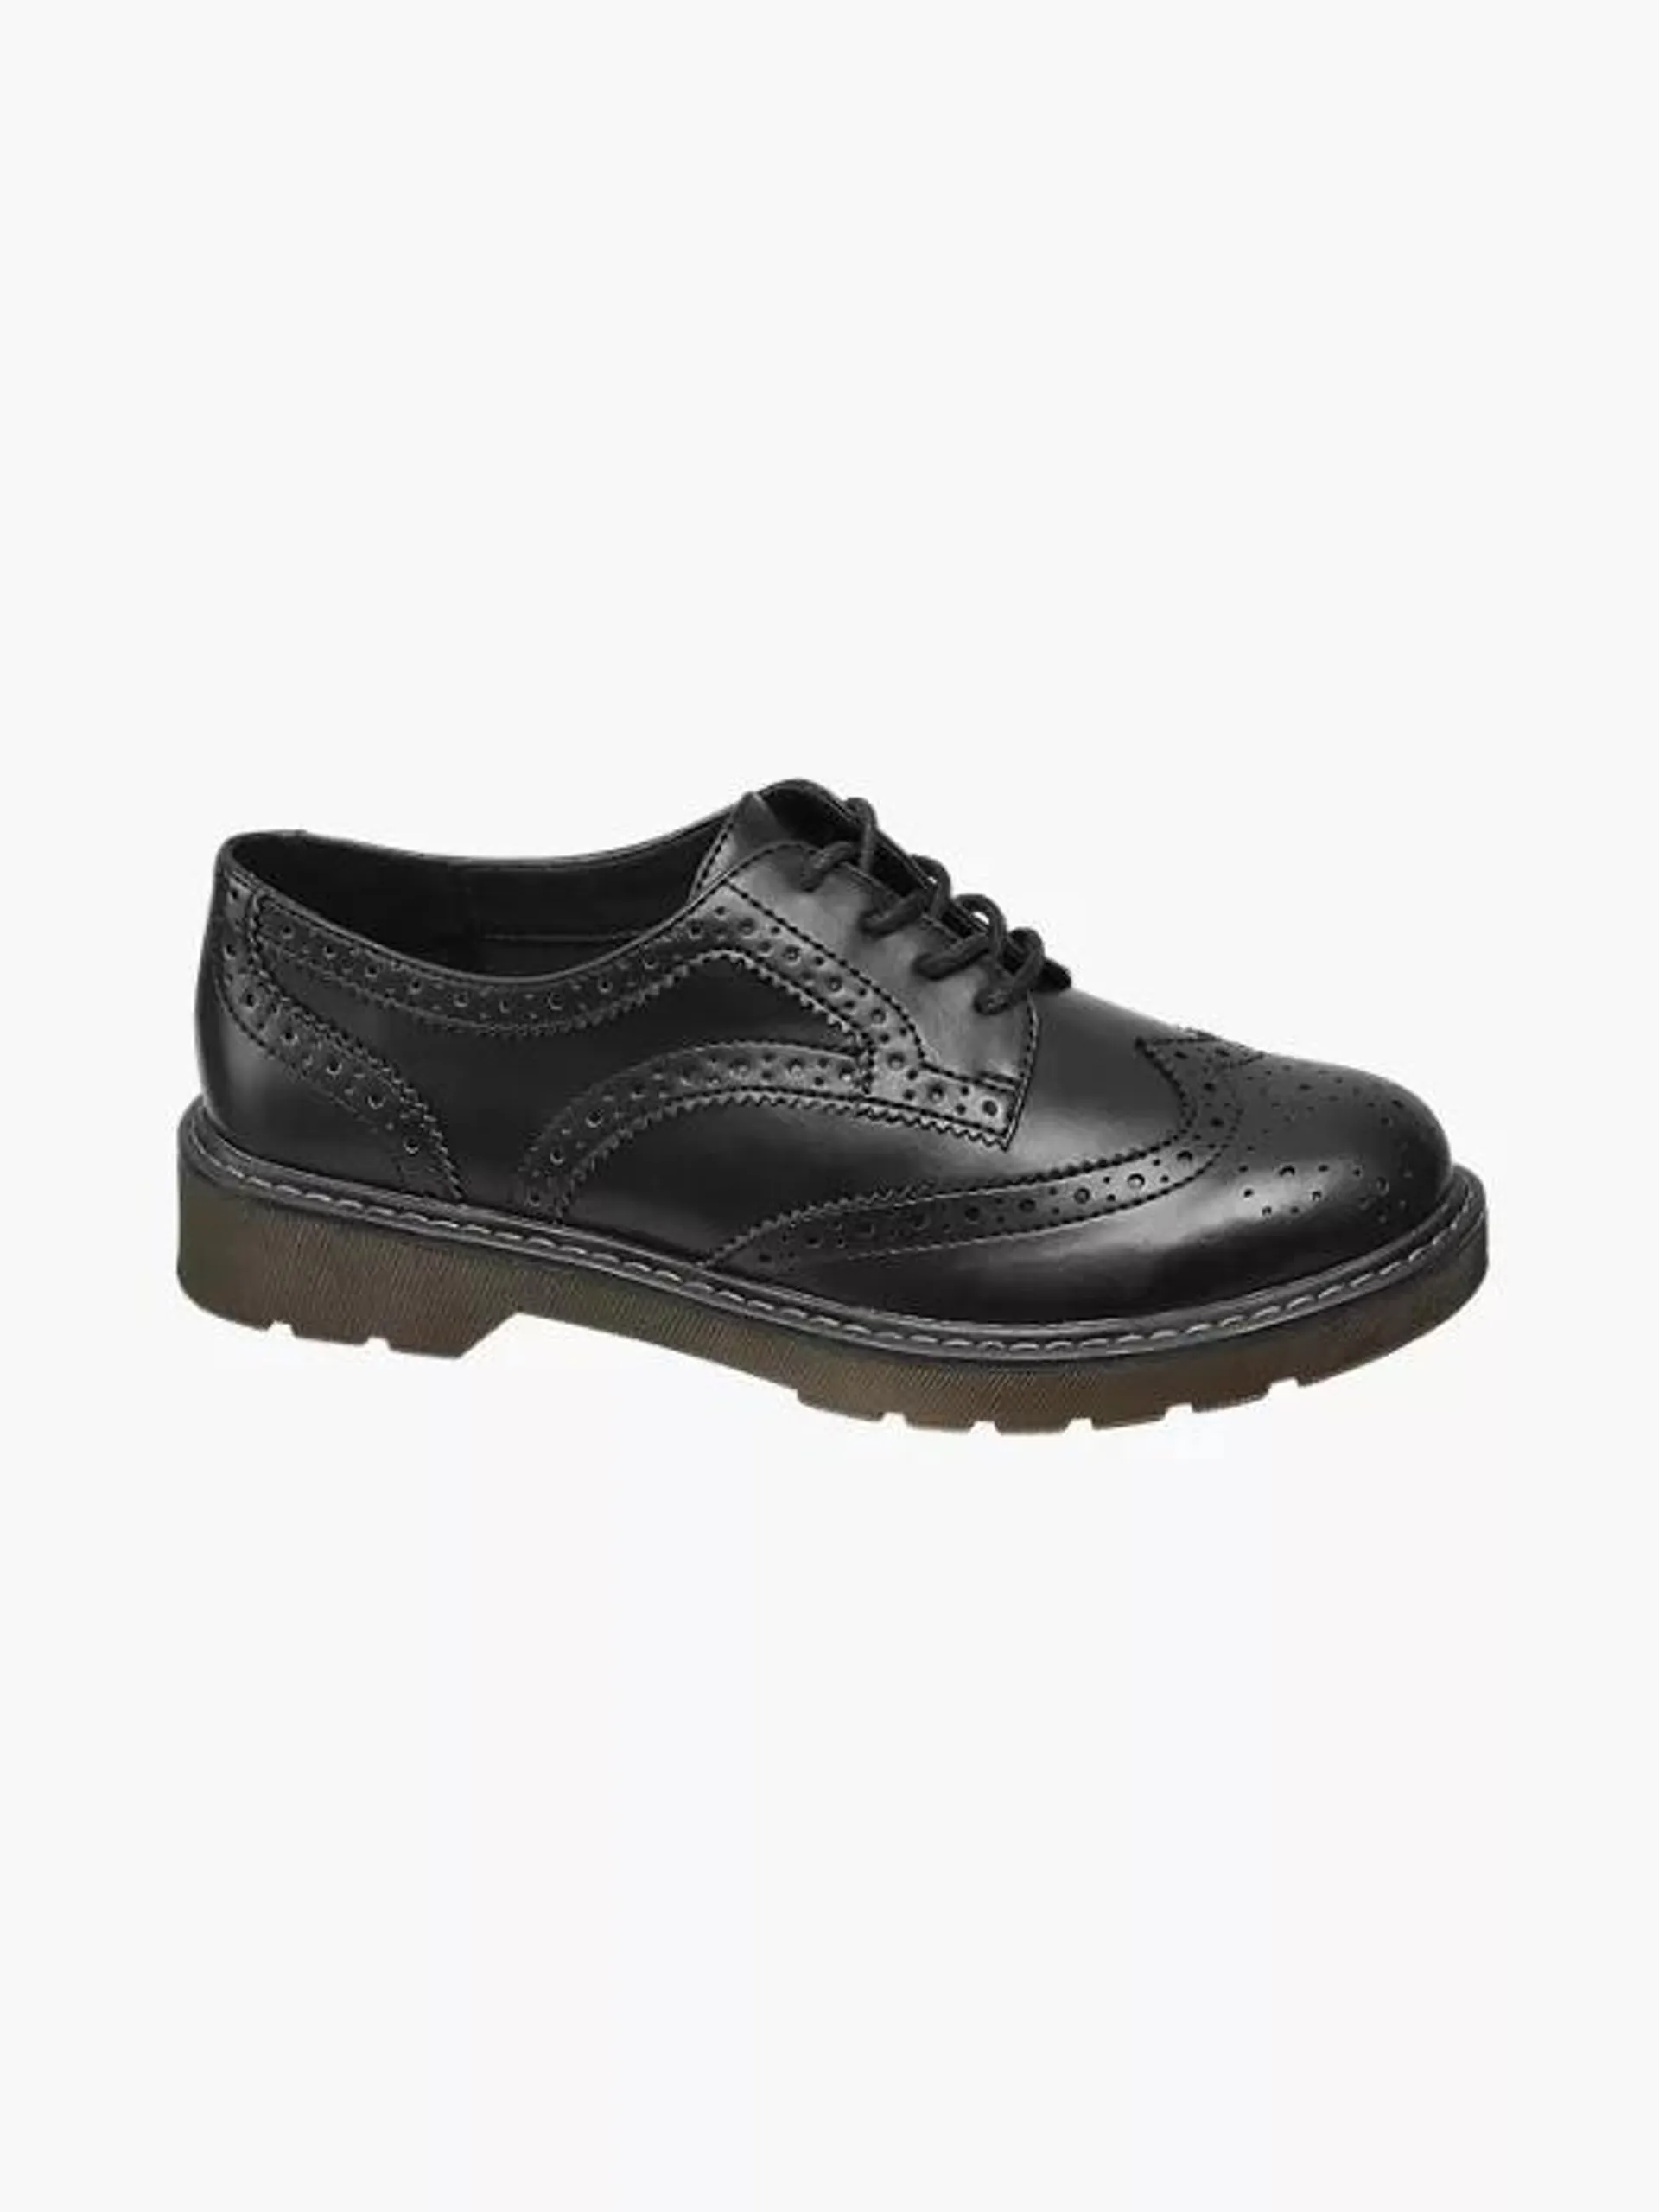 Ladies Black Chunky Lace Up Brogues